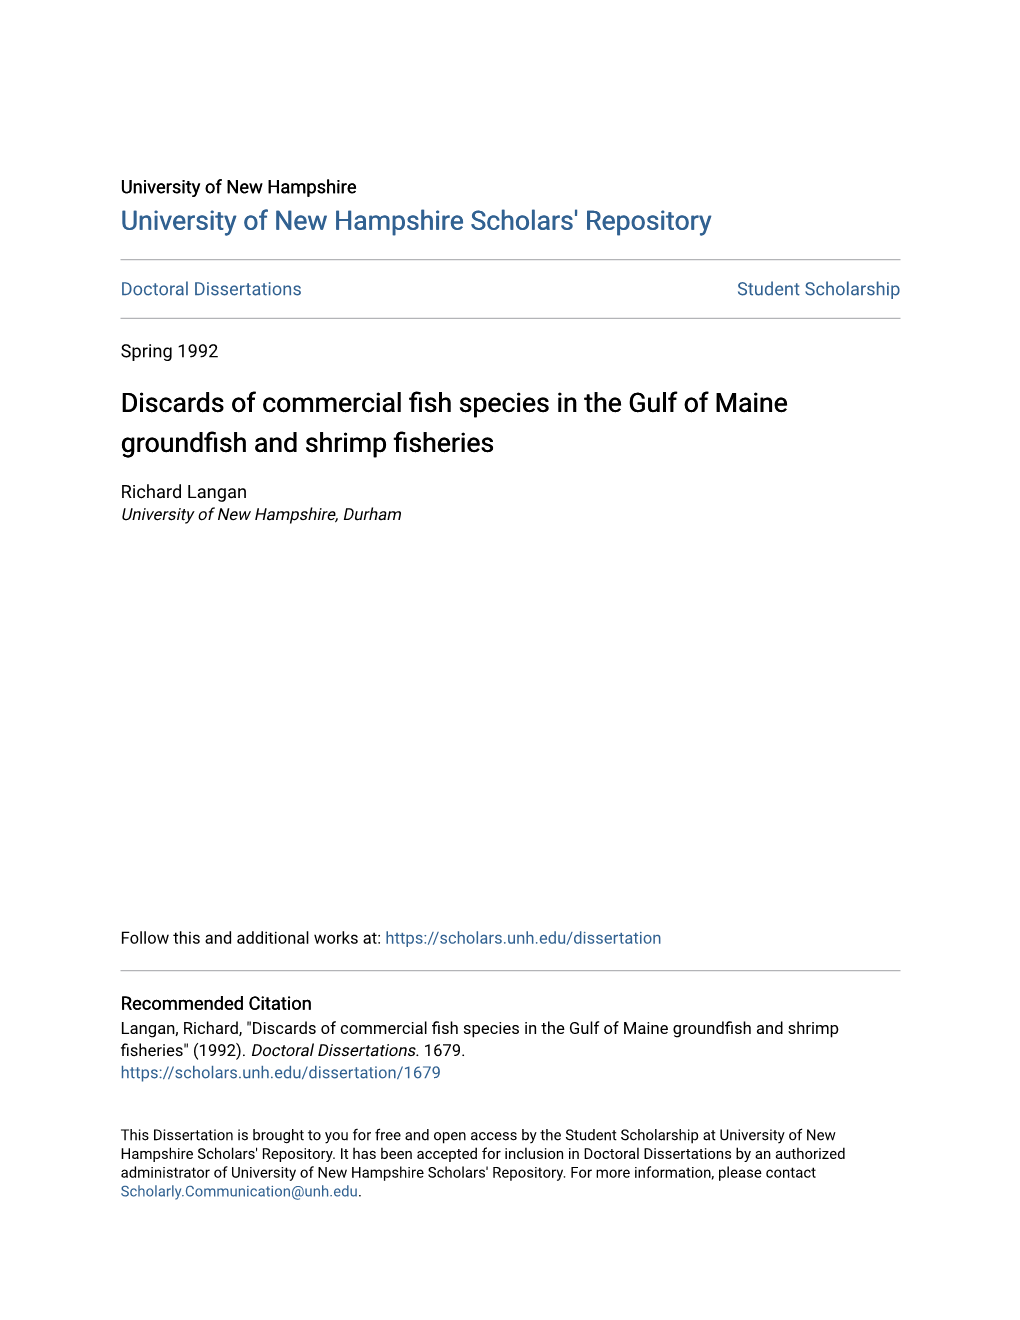 Discards of Commercial Fish Species in the Gulf of Maine Groundfish and Shrimp Fisheries